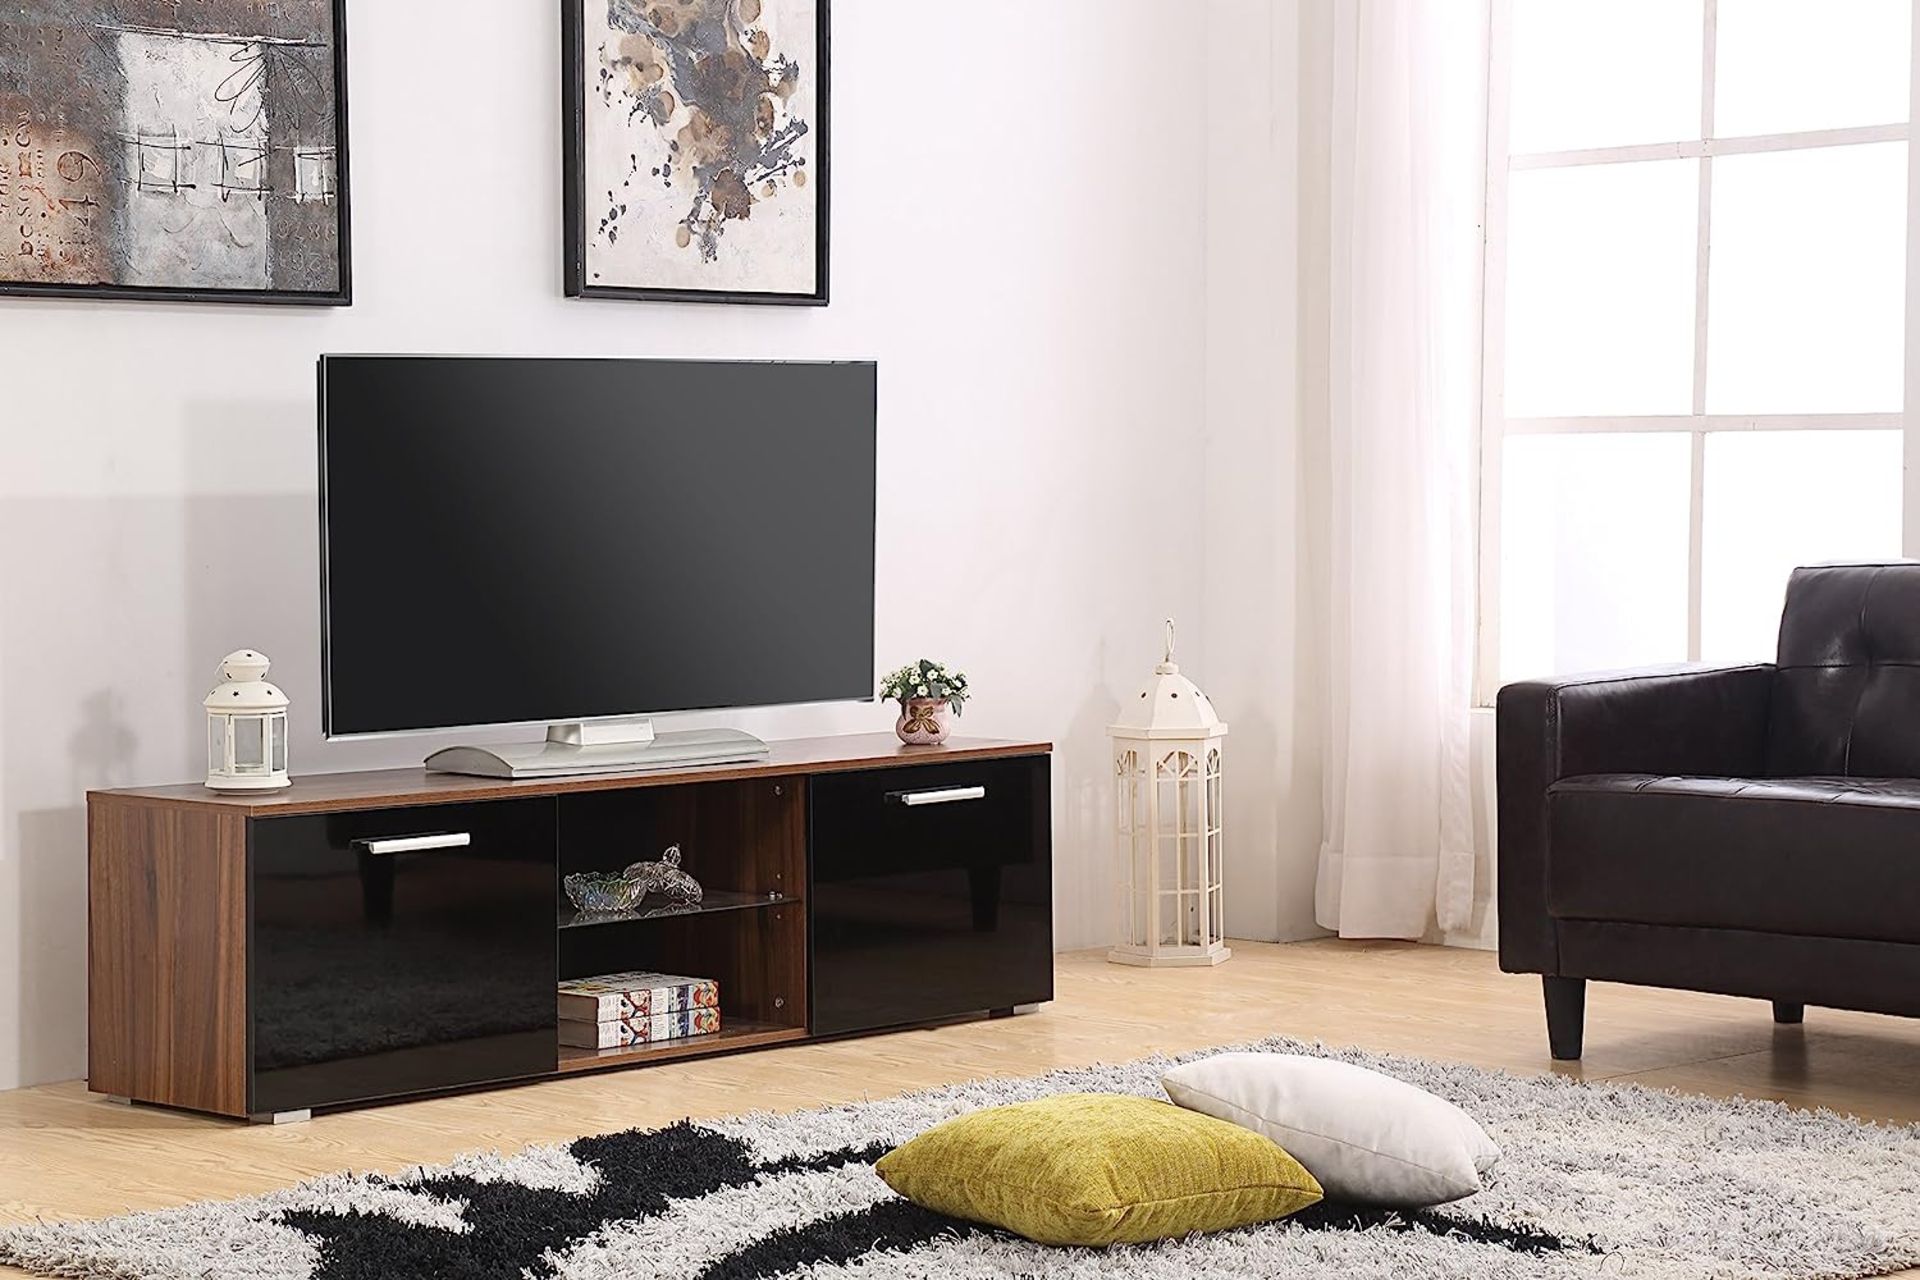 10 X BRAND NEW MODERN 160CM TV STAND CABINET UNIT WITH HIGH GLOSS DOORS (BLACK ON WALNUT) - Image 2 of 9